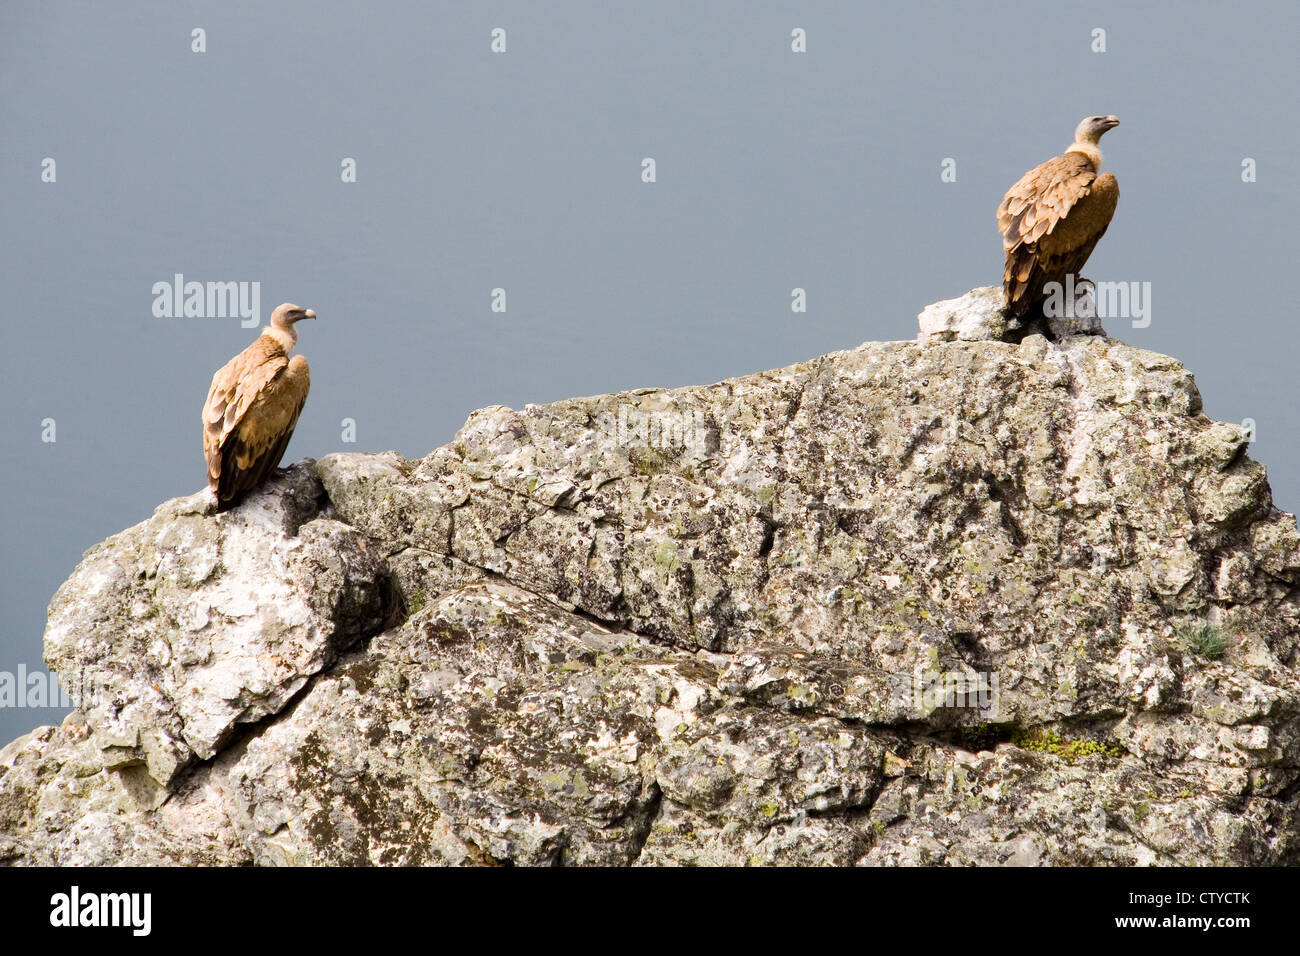 Two Griffon Vultures (Gyps Fulvus) resting on a rocky outcrop in Monfrague National Park, Extremadura, central Spain Stock Photo